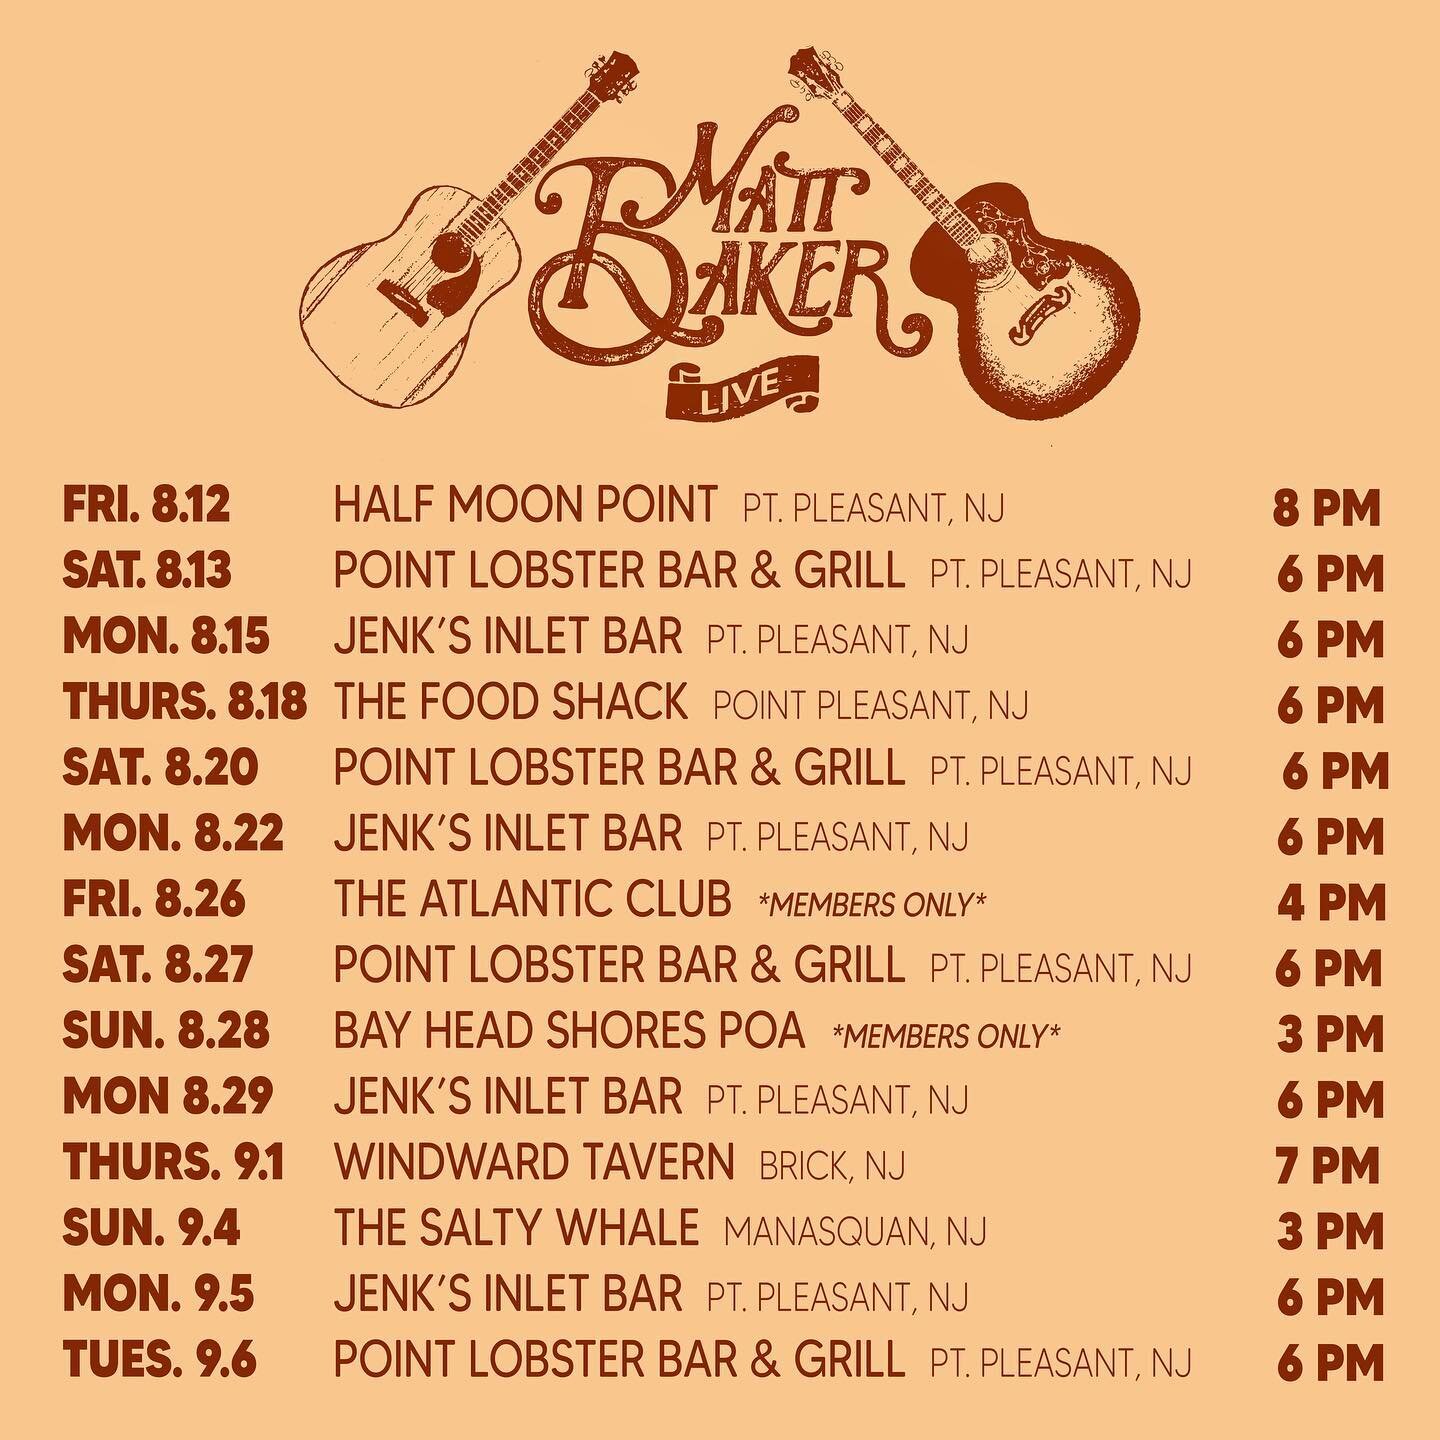 UPDATED SCHEDULE for the rest of the summer! Including my debut at @thesaltywhaleguesthouse on Labor Day weekend!💥 Also a note that my date at @theatlanticclub 8/21 has been moved to Friday 8/26 4-7pm for happy hour. Kicking off this weekend at @hal